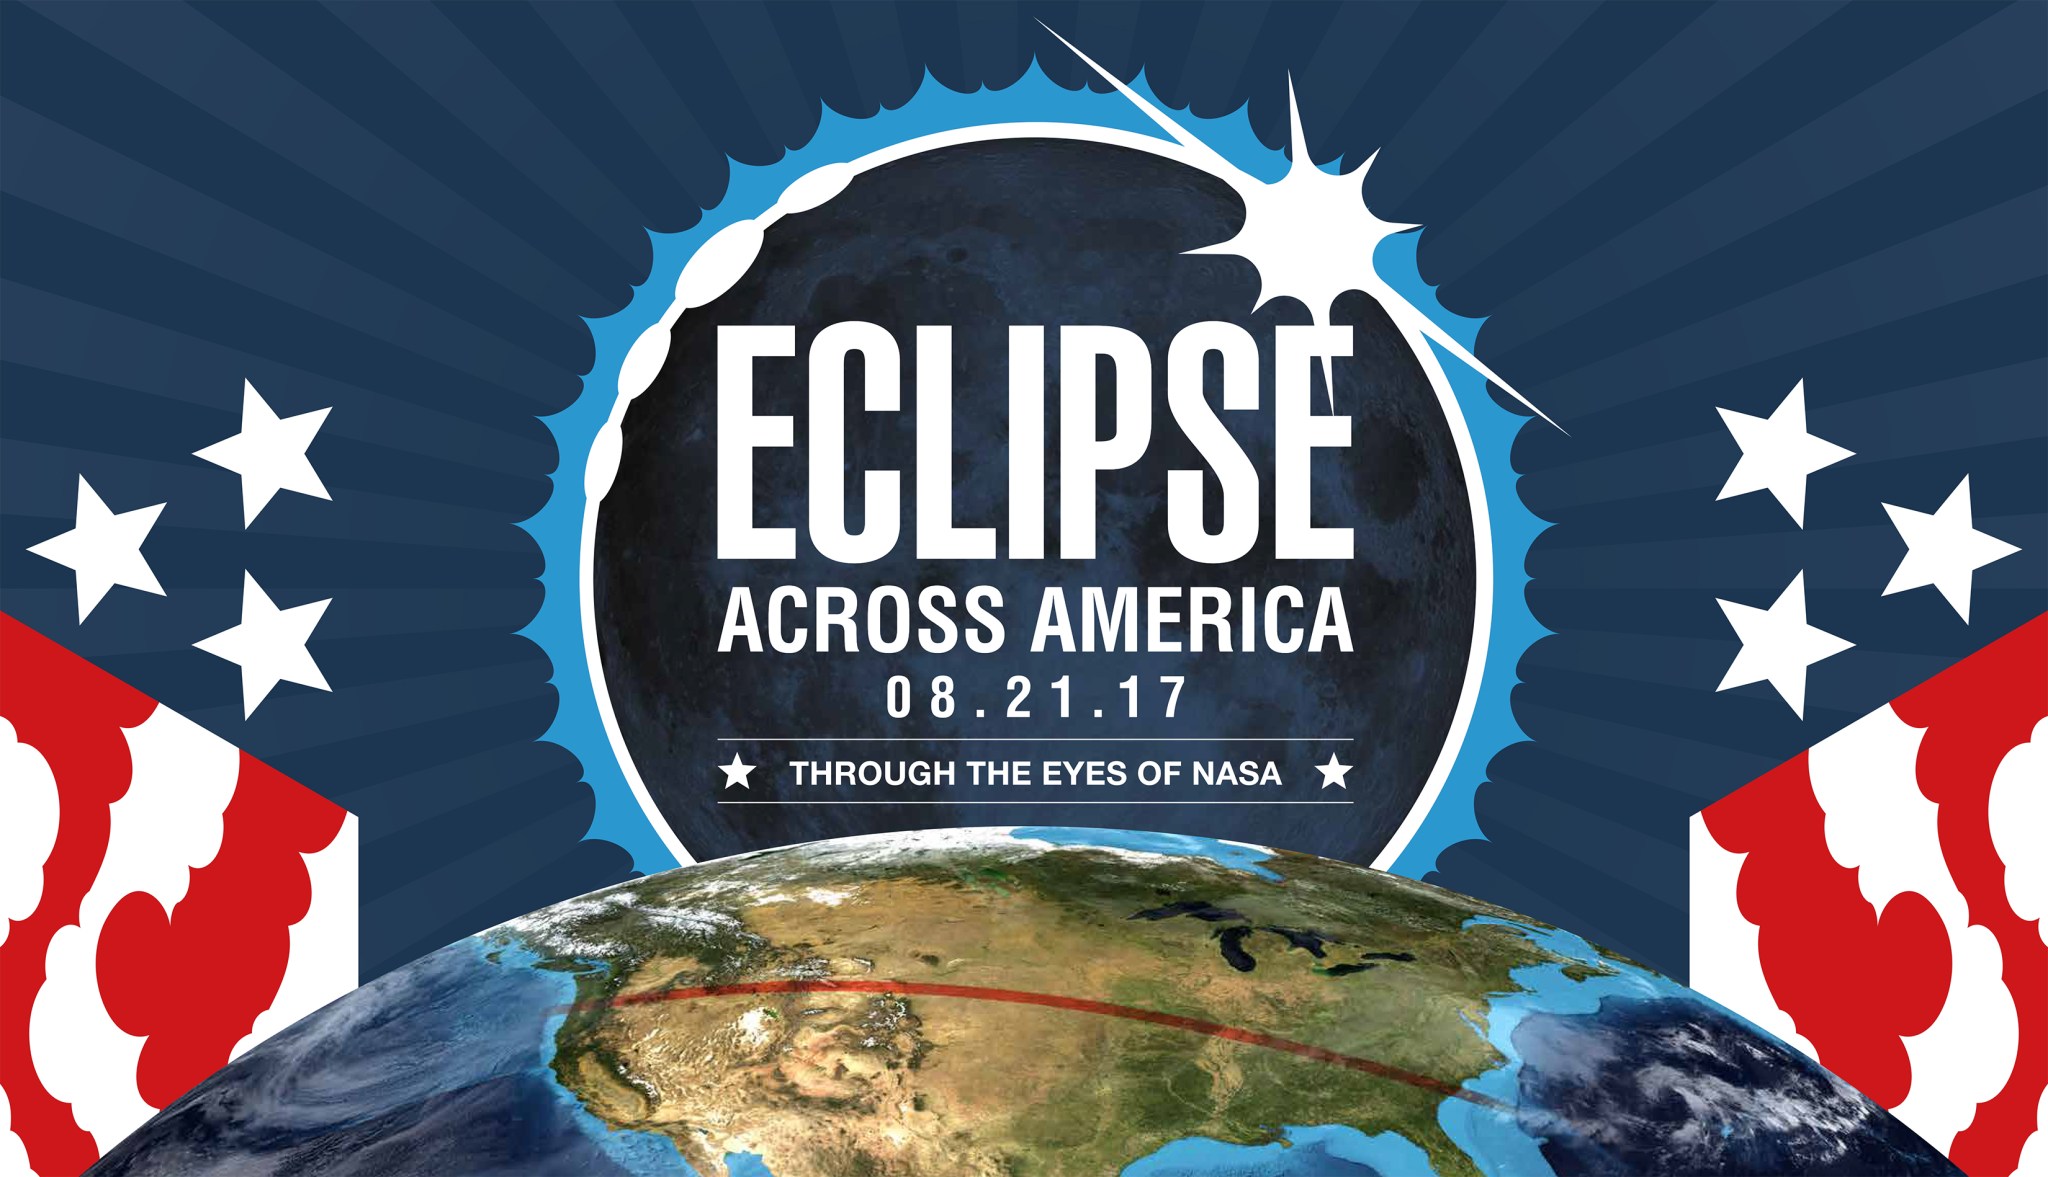 Eclipse Across America - August 21, 2017 - Through the Eyes of NASA sign